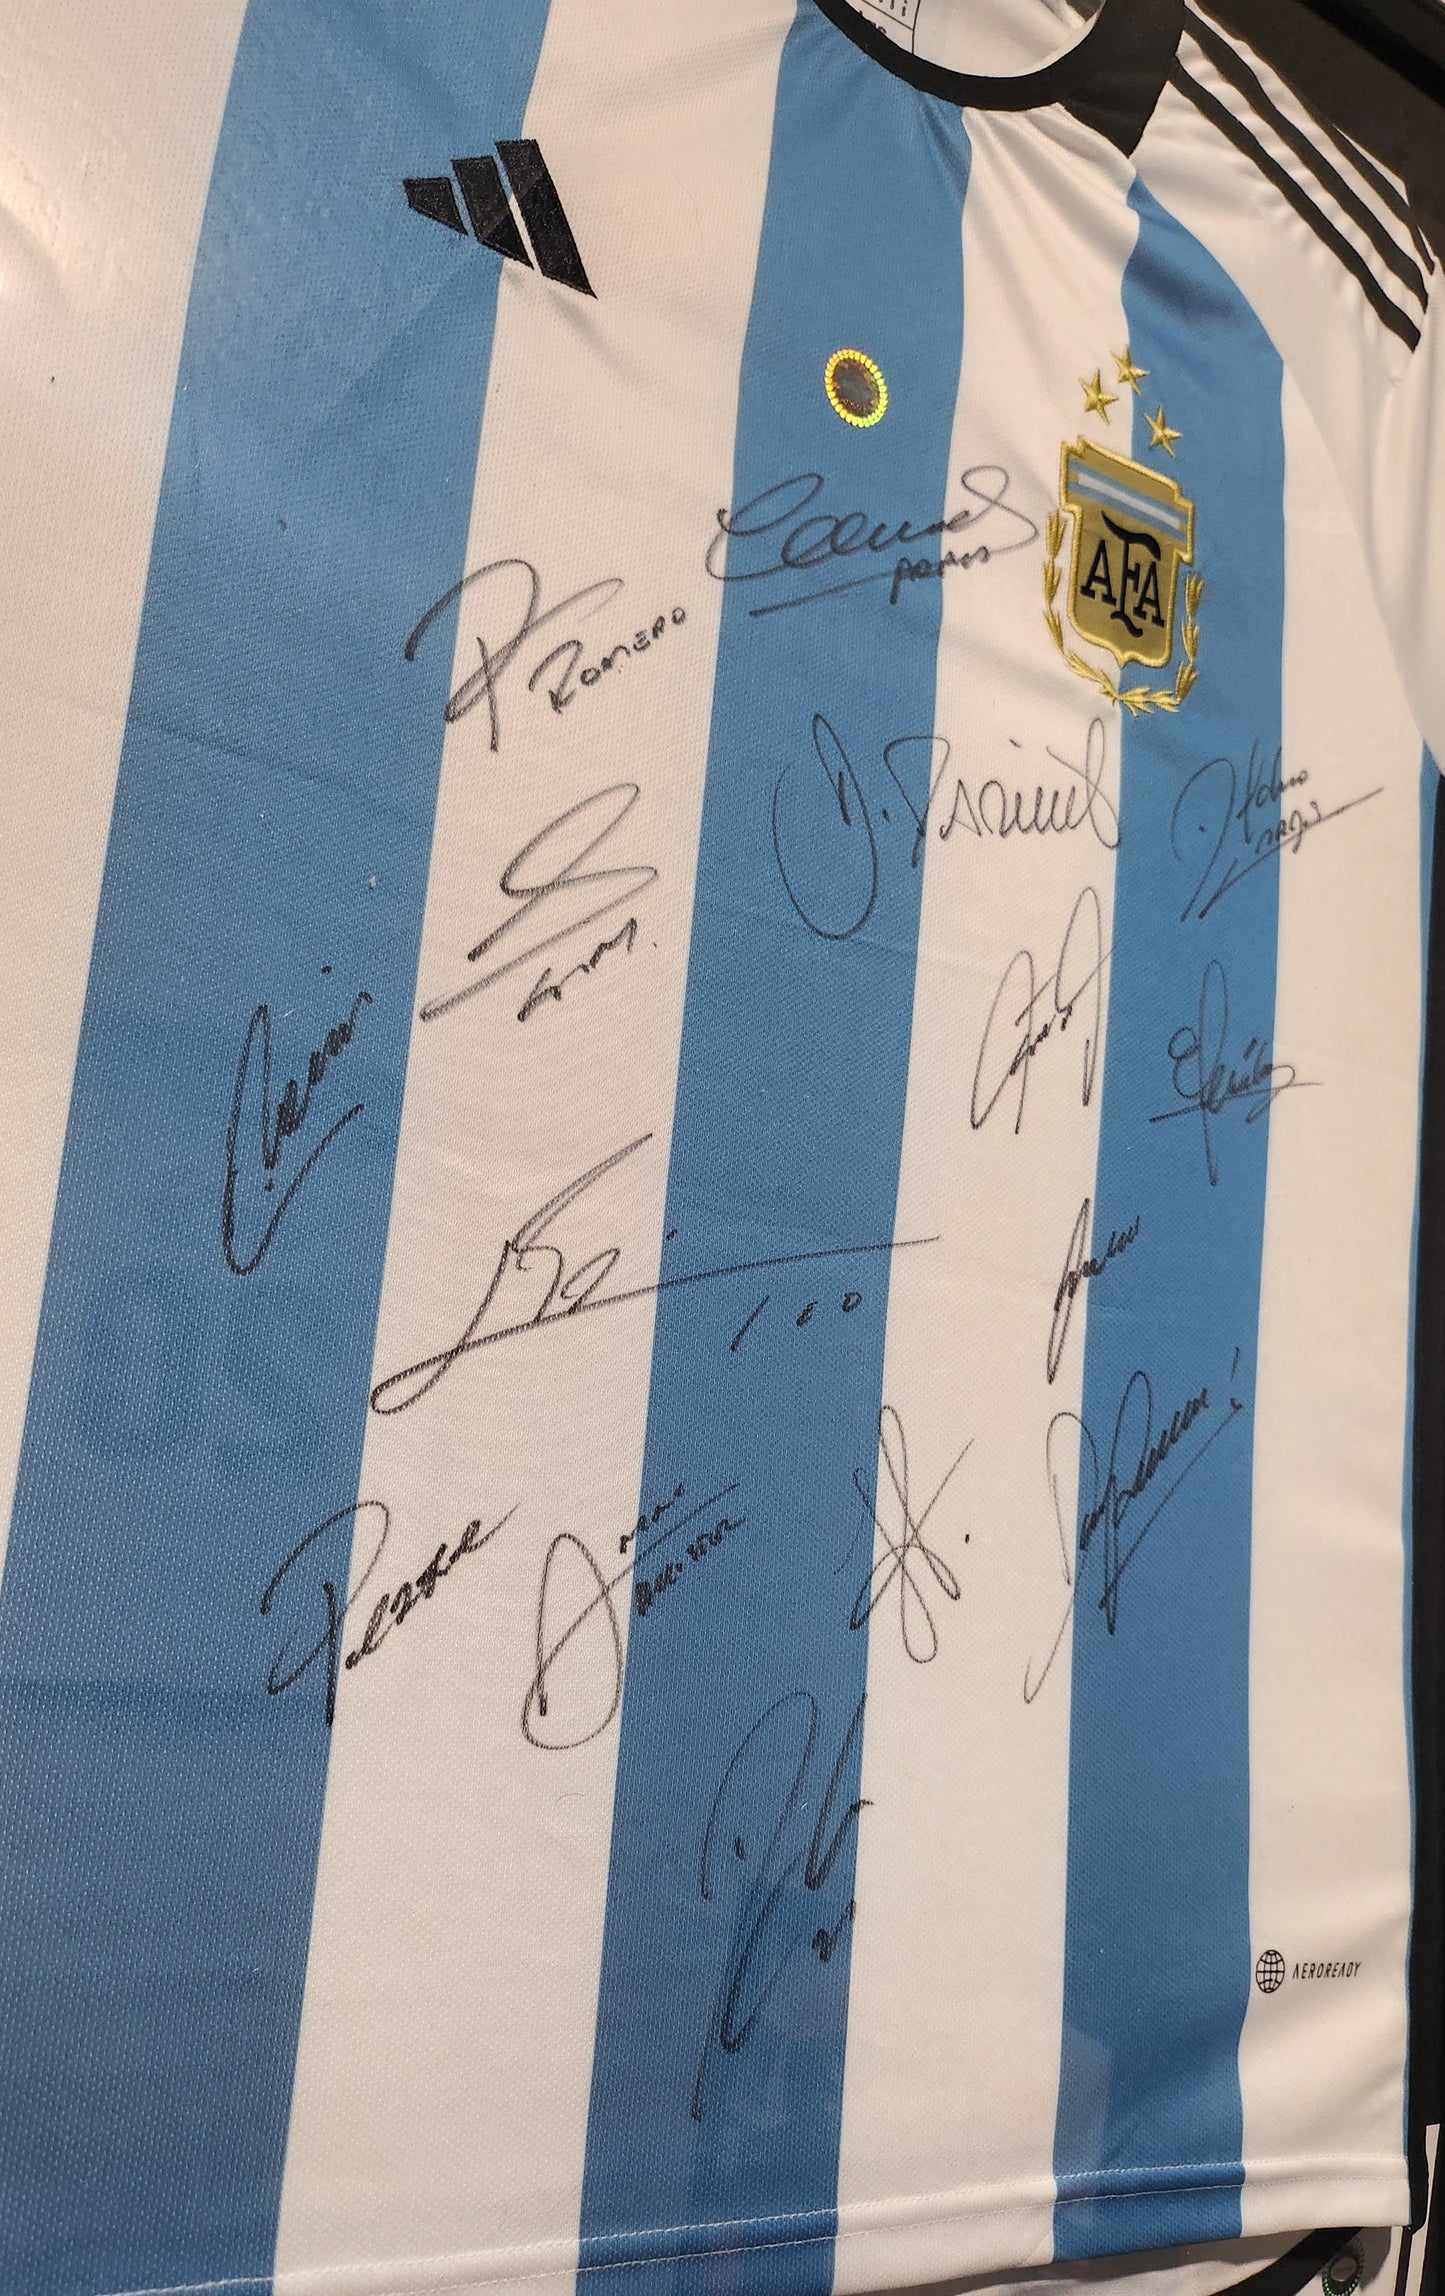 Argentina 2022 World Champions signed Jersey - Messi and 14 more!